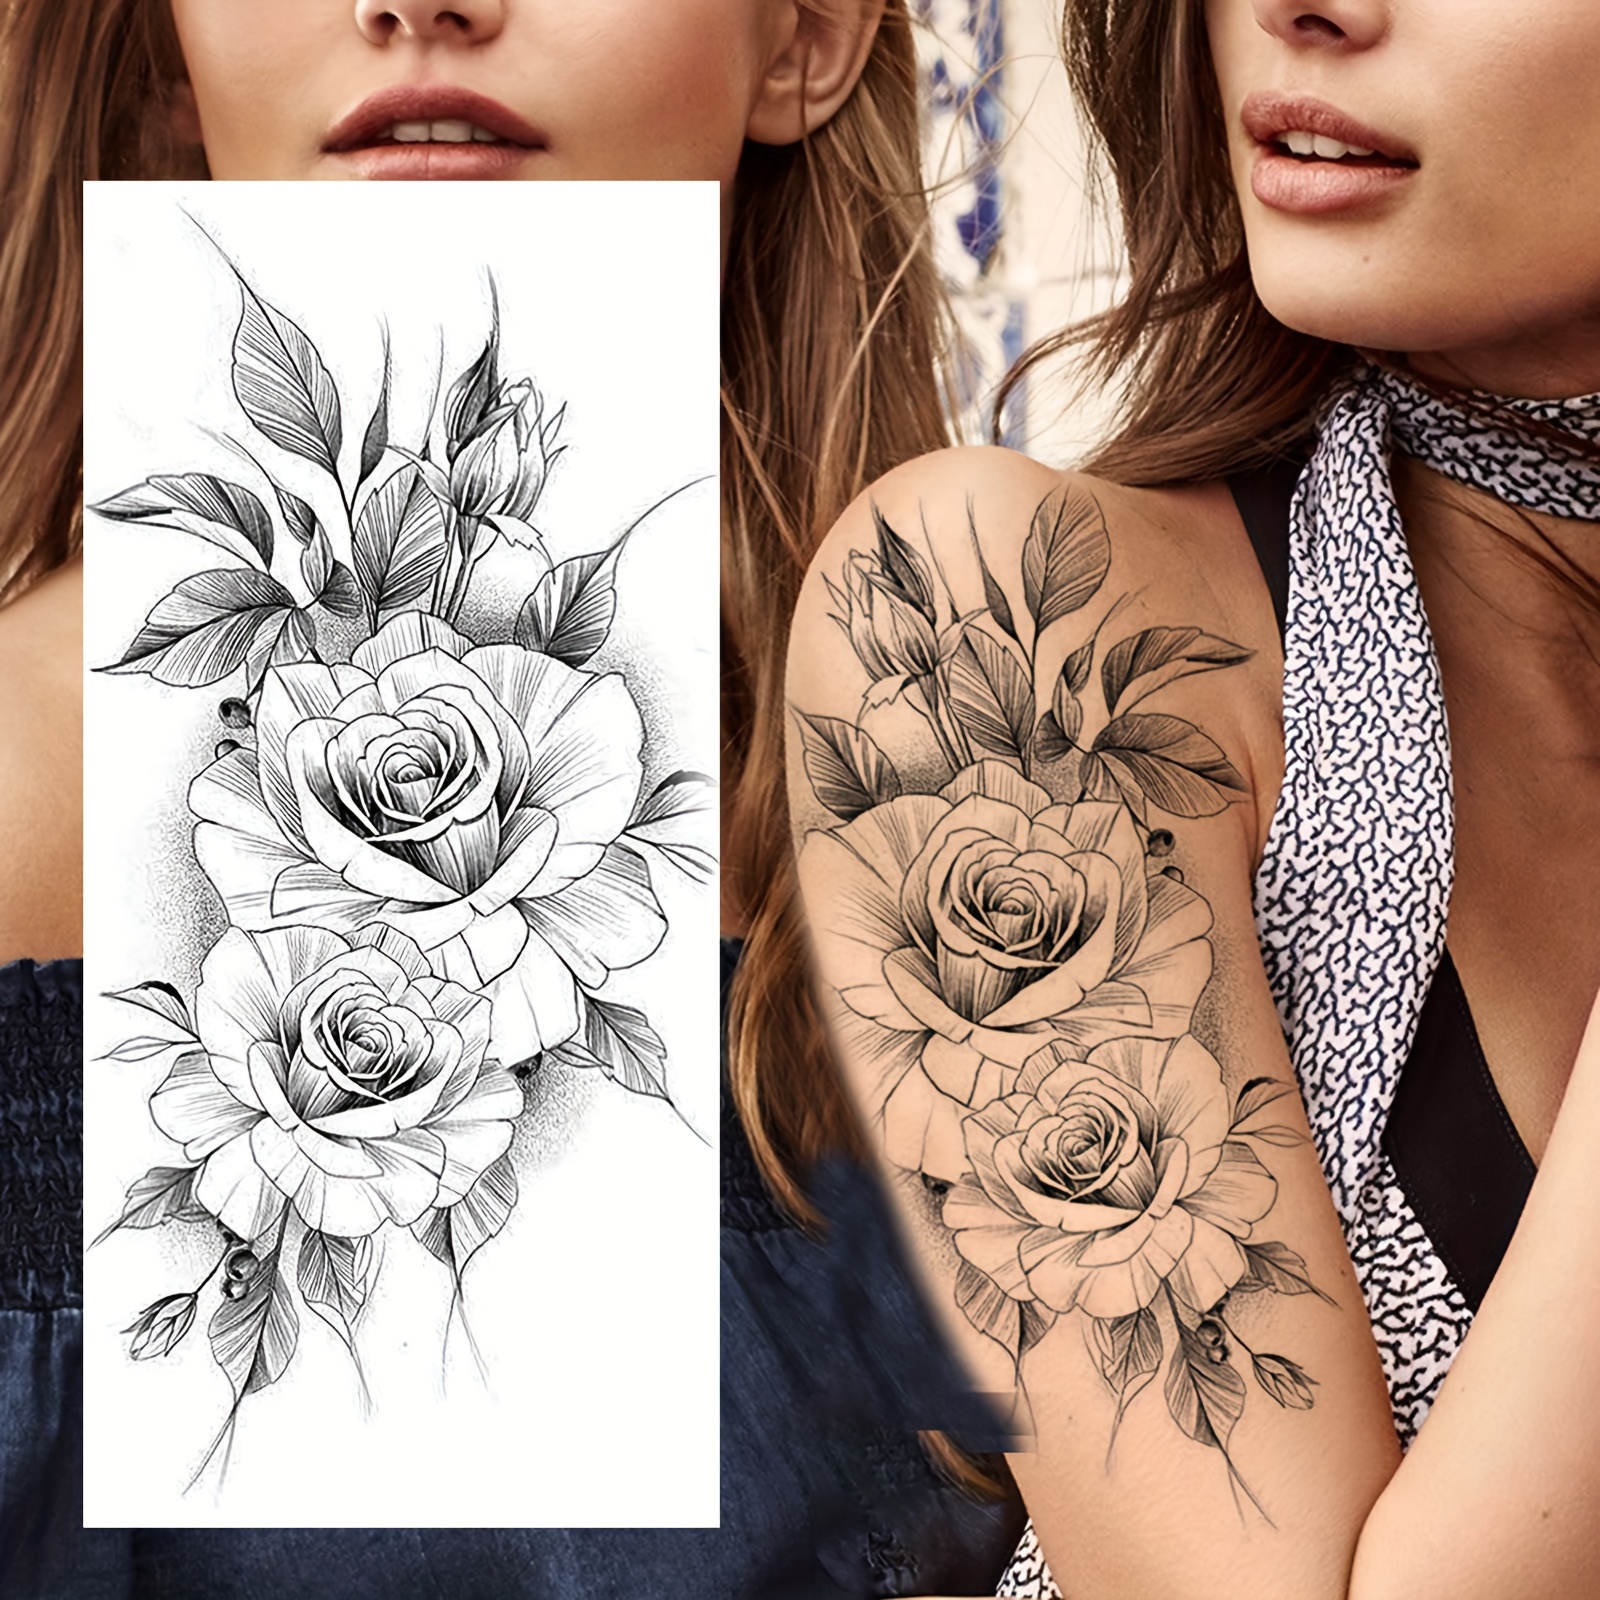 

Realistic Sketch Peony & Rose Temporary Tattoos For Women, 1 Sheet Waterproof Black Floral Body Art Stickers For Adult, Long-lasting Fake Sleeve Tattoos For Arm, Leg, Forearm - Oblong Shape